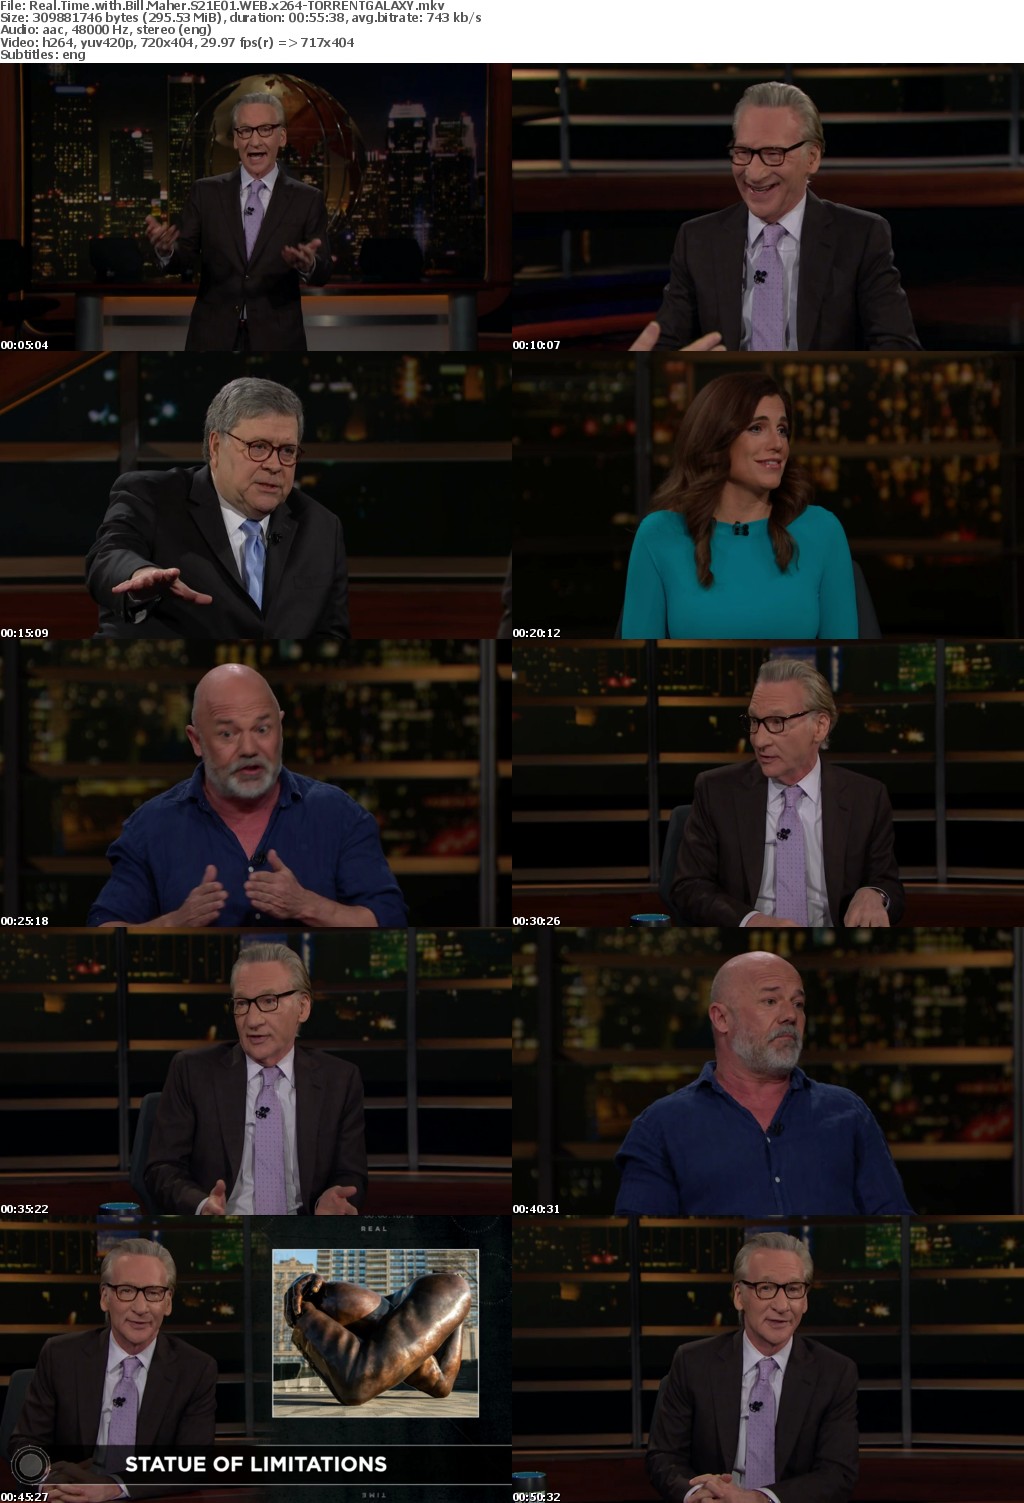 Real Time with Bill Maher S21E01 WEB x264-GALAXY